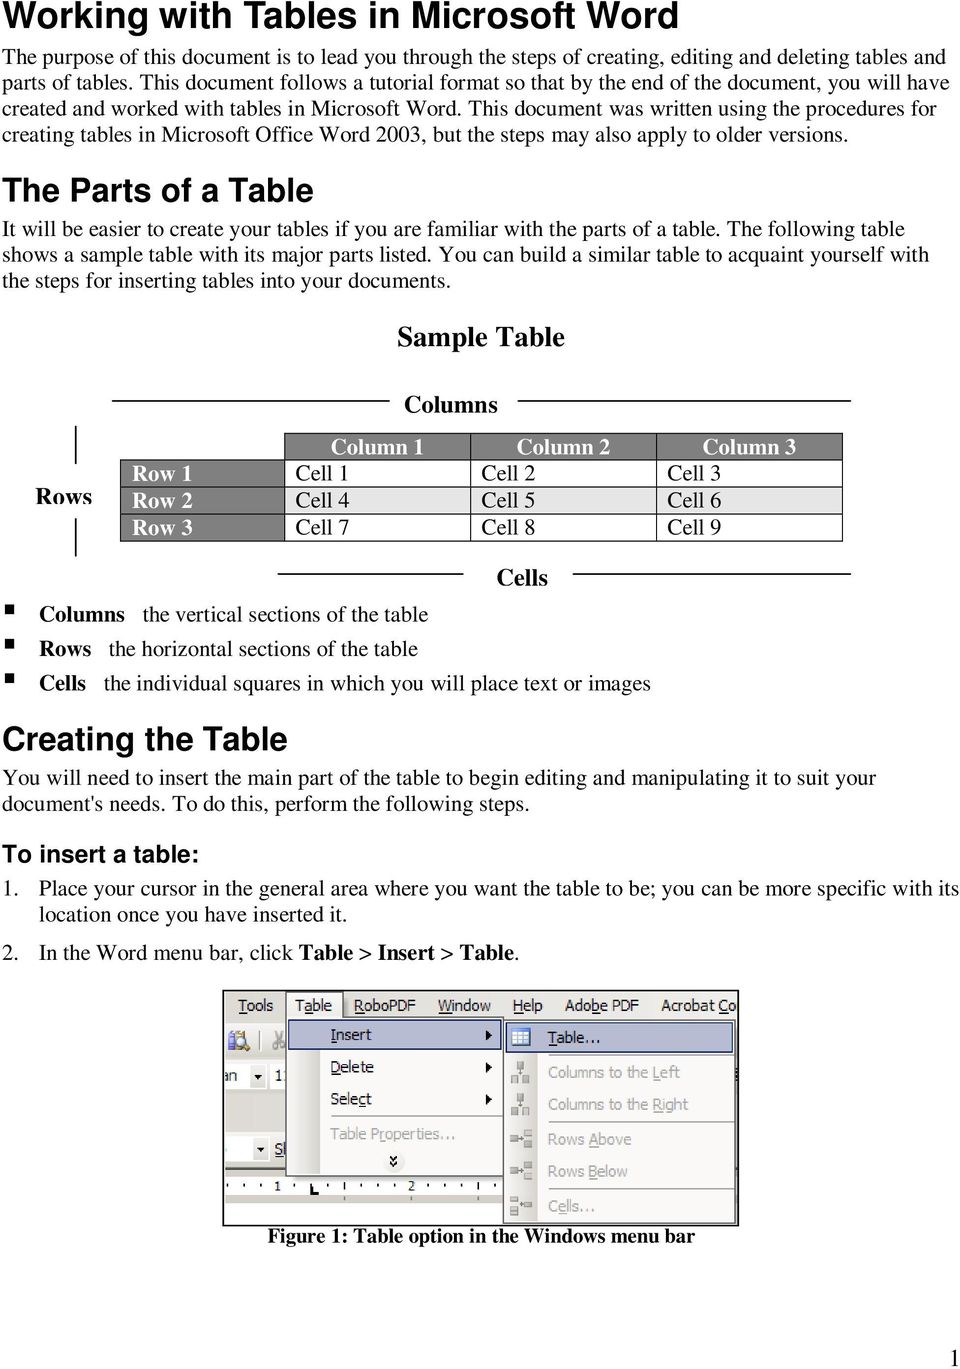 This document was written using the procedures for creating tables in Microsoft Office Word 2003, but the steps may also apply to older versions.